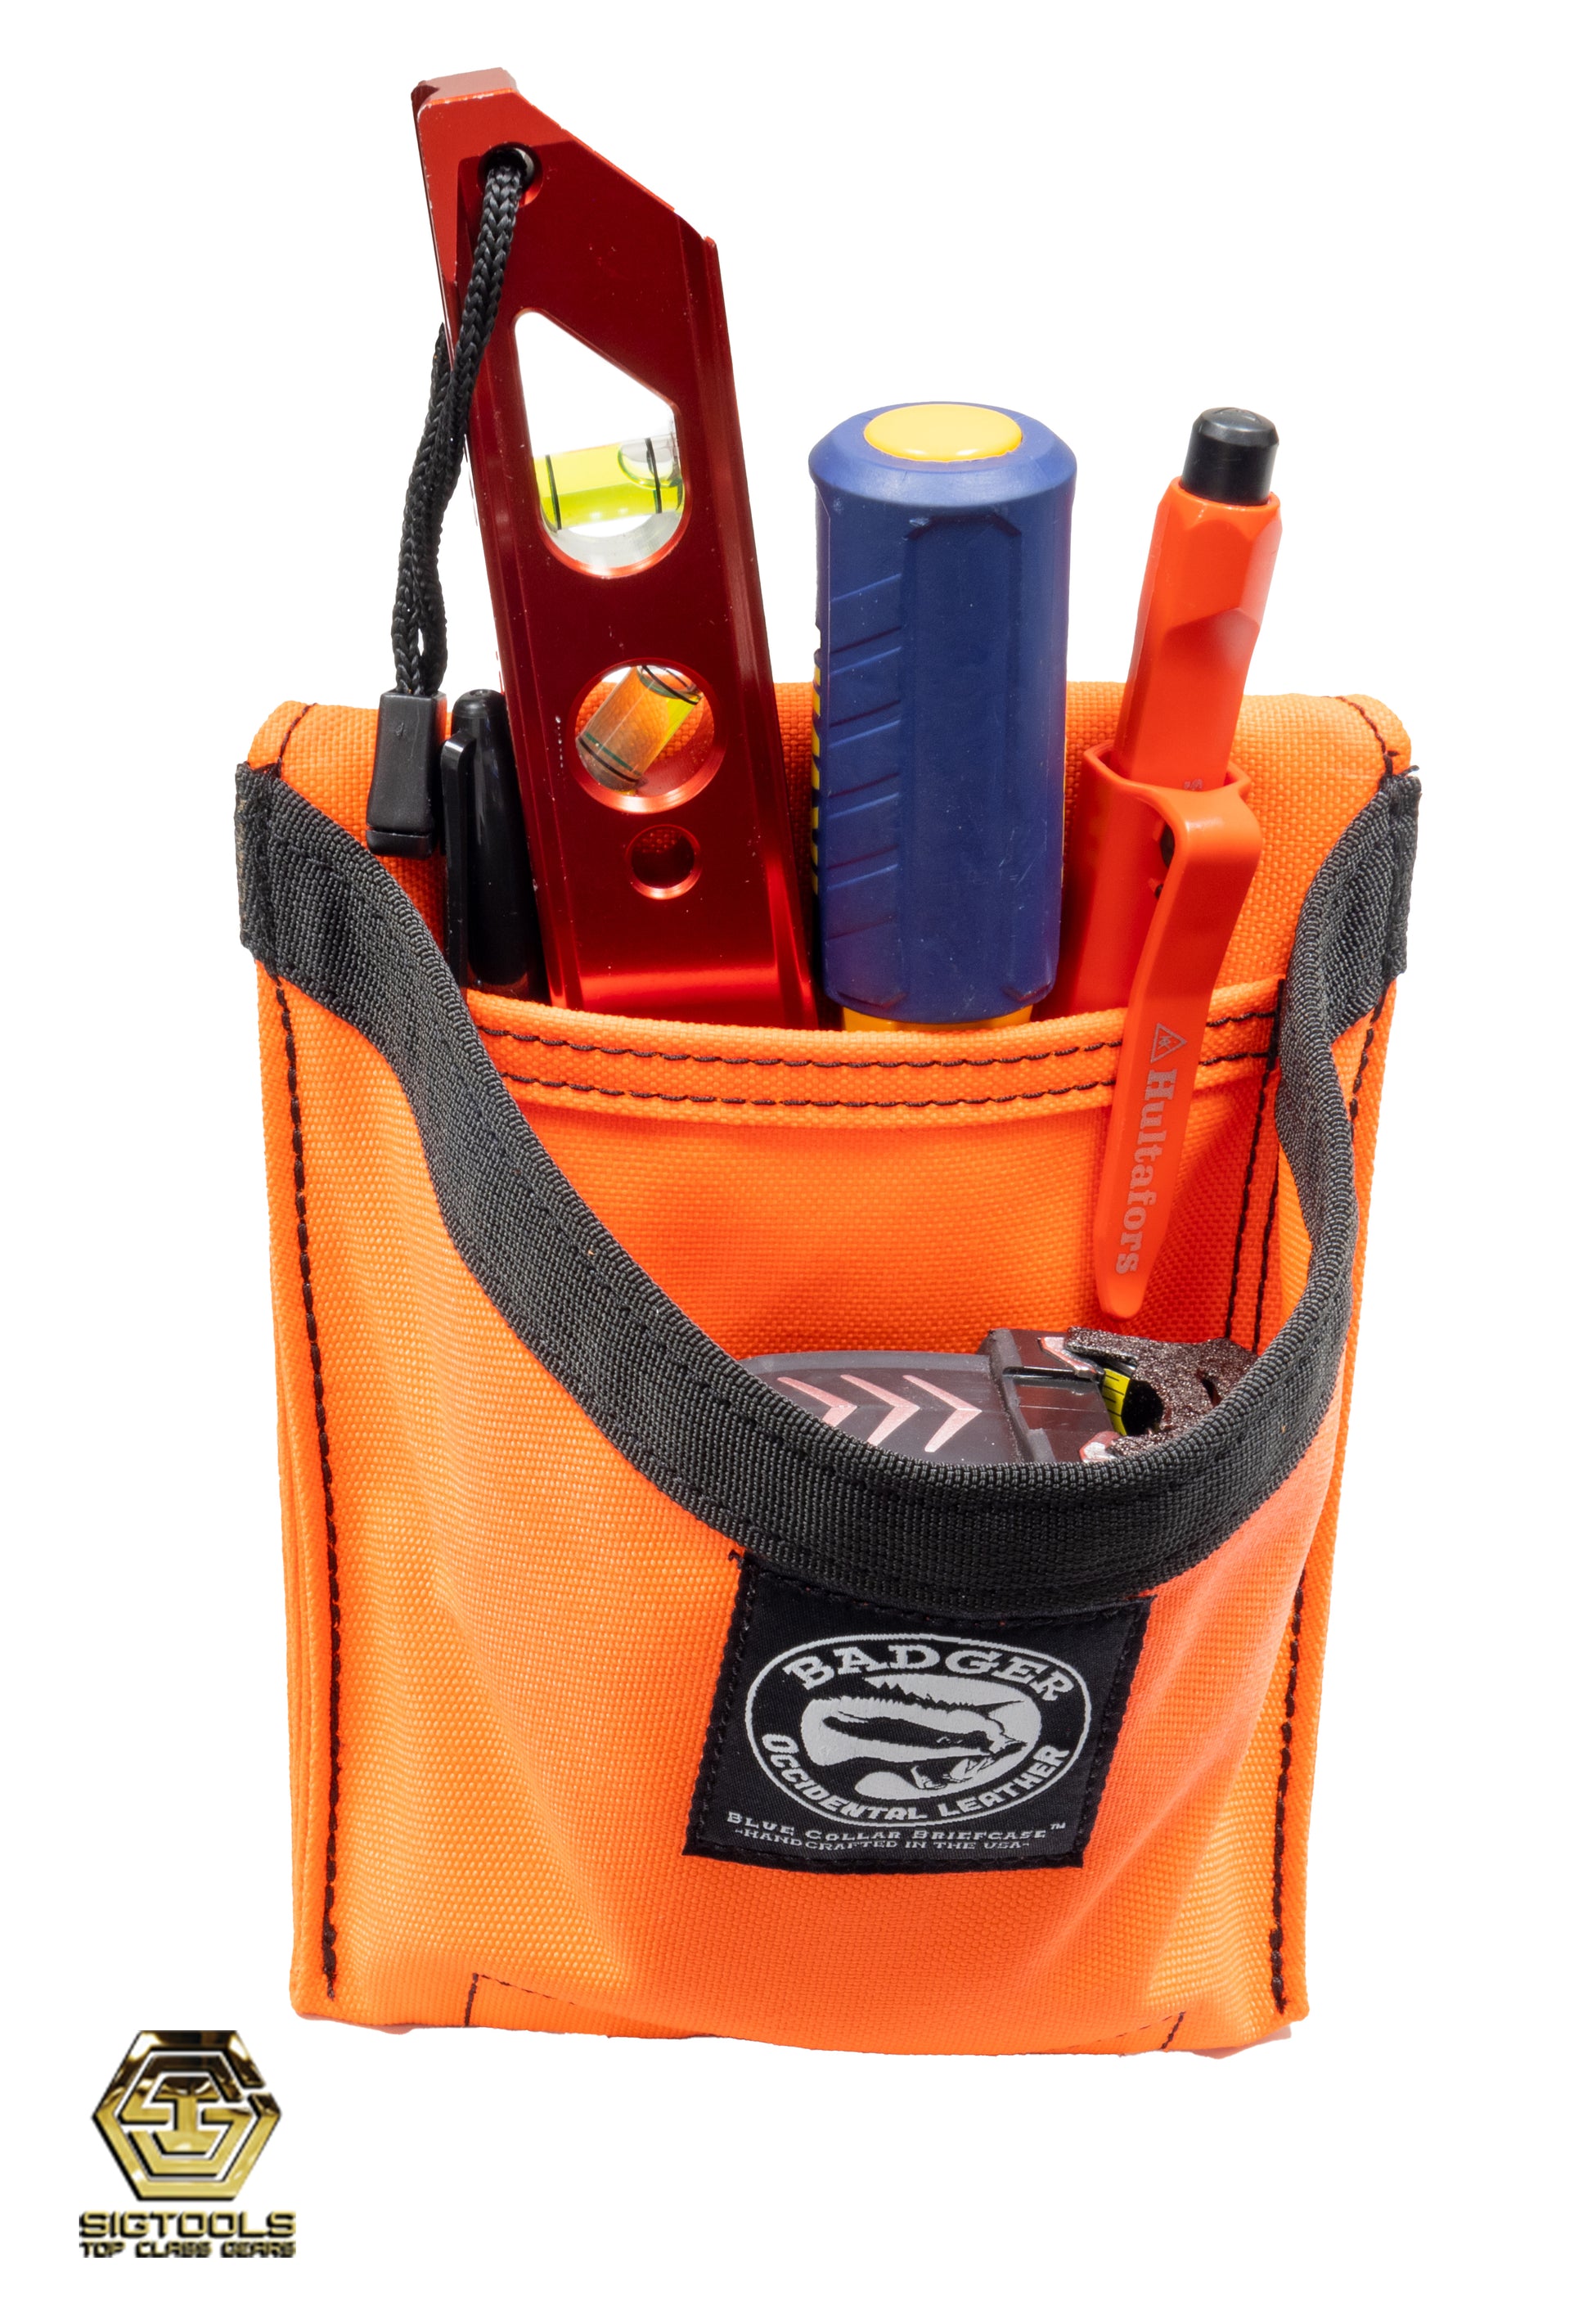 A  high visibility tool pouch from Badger, filled with tools and accessories, ready for efficient and organized use.